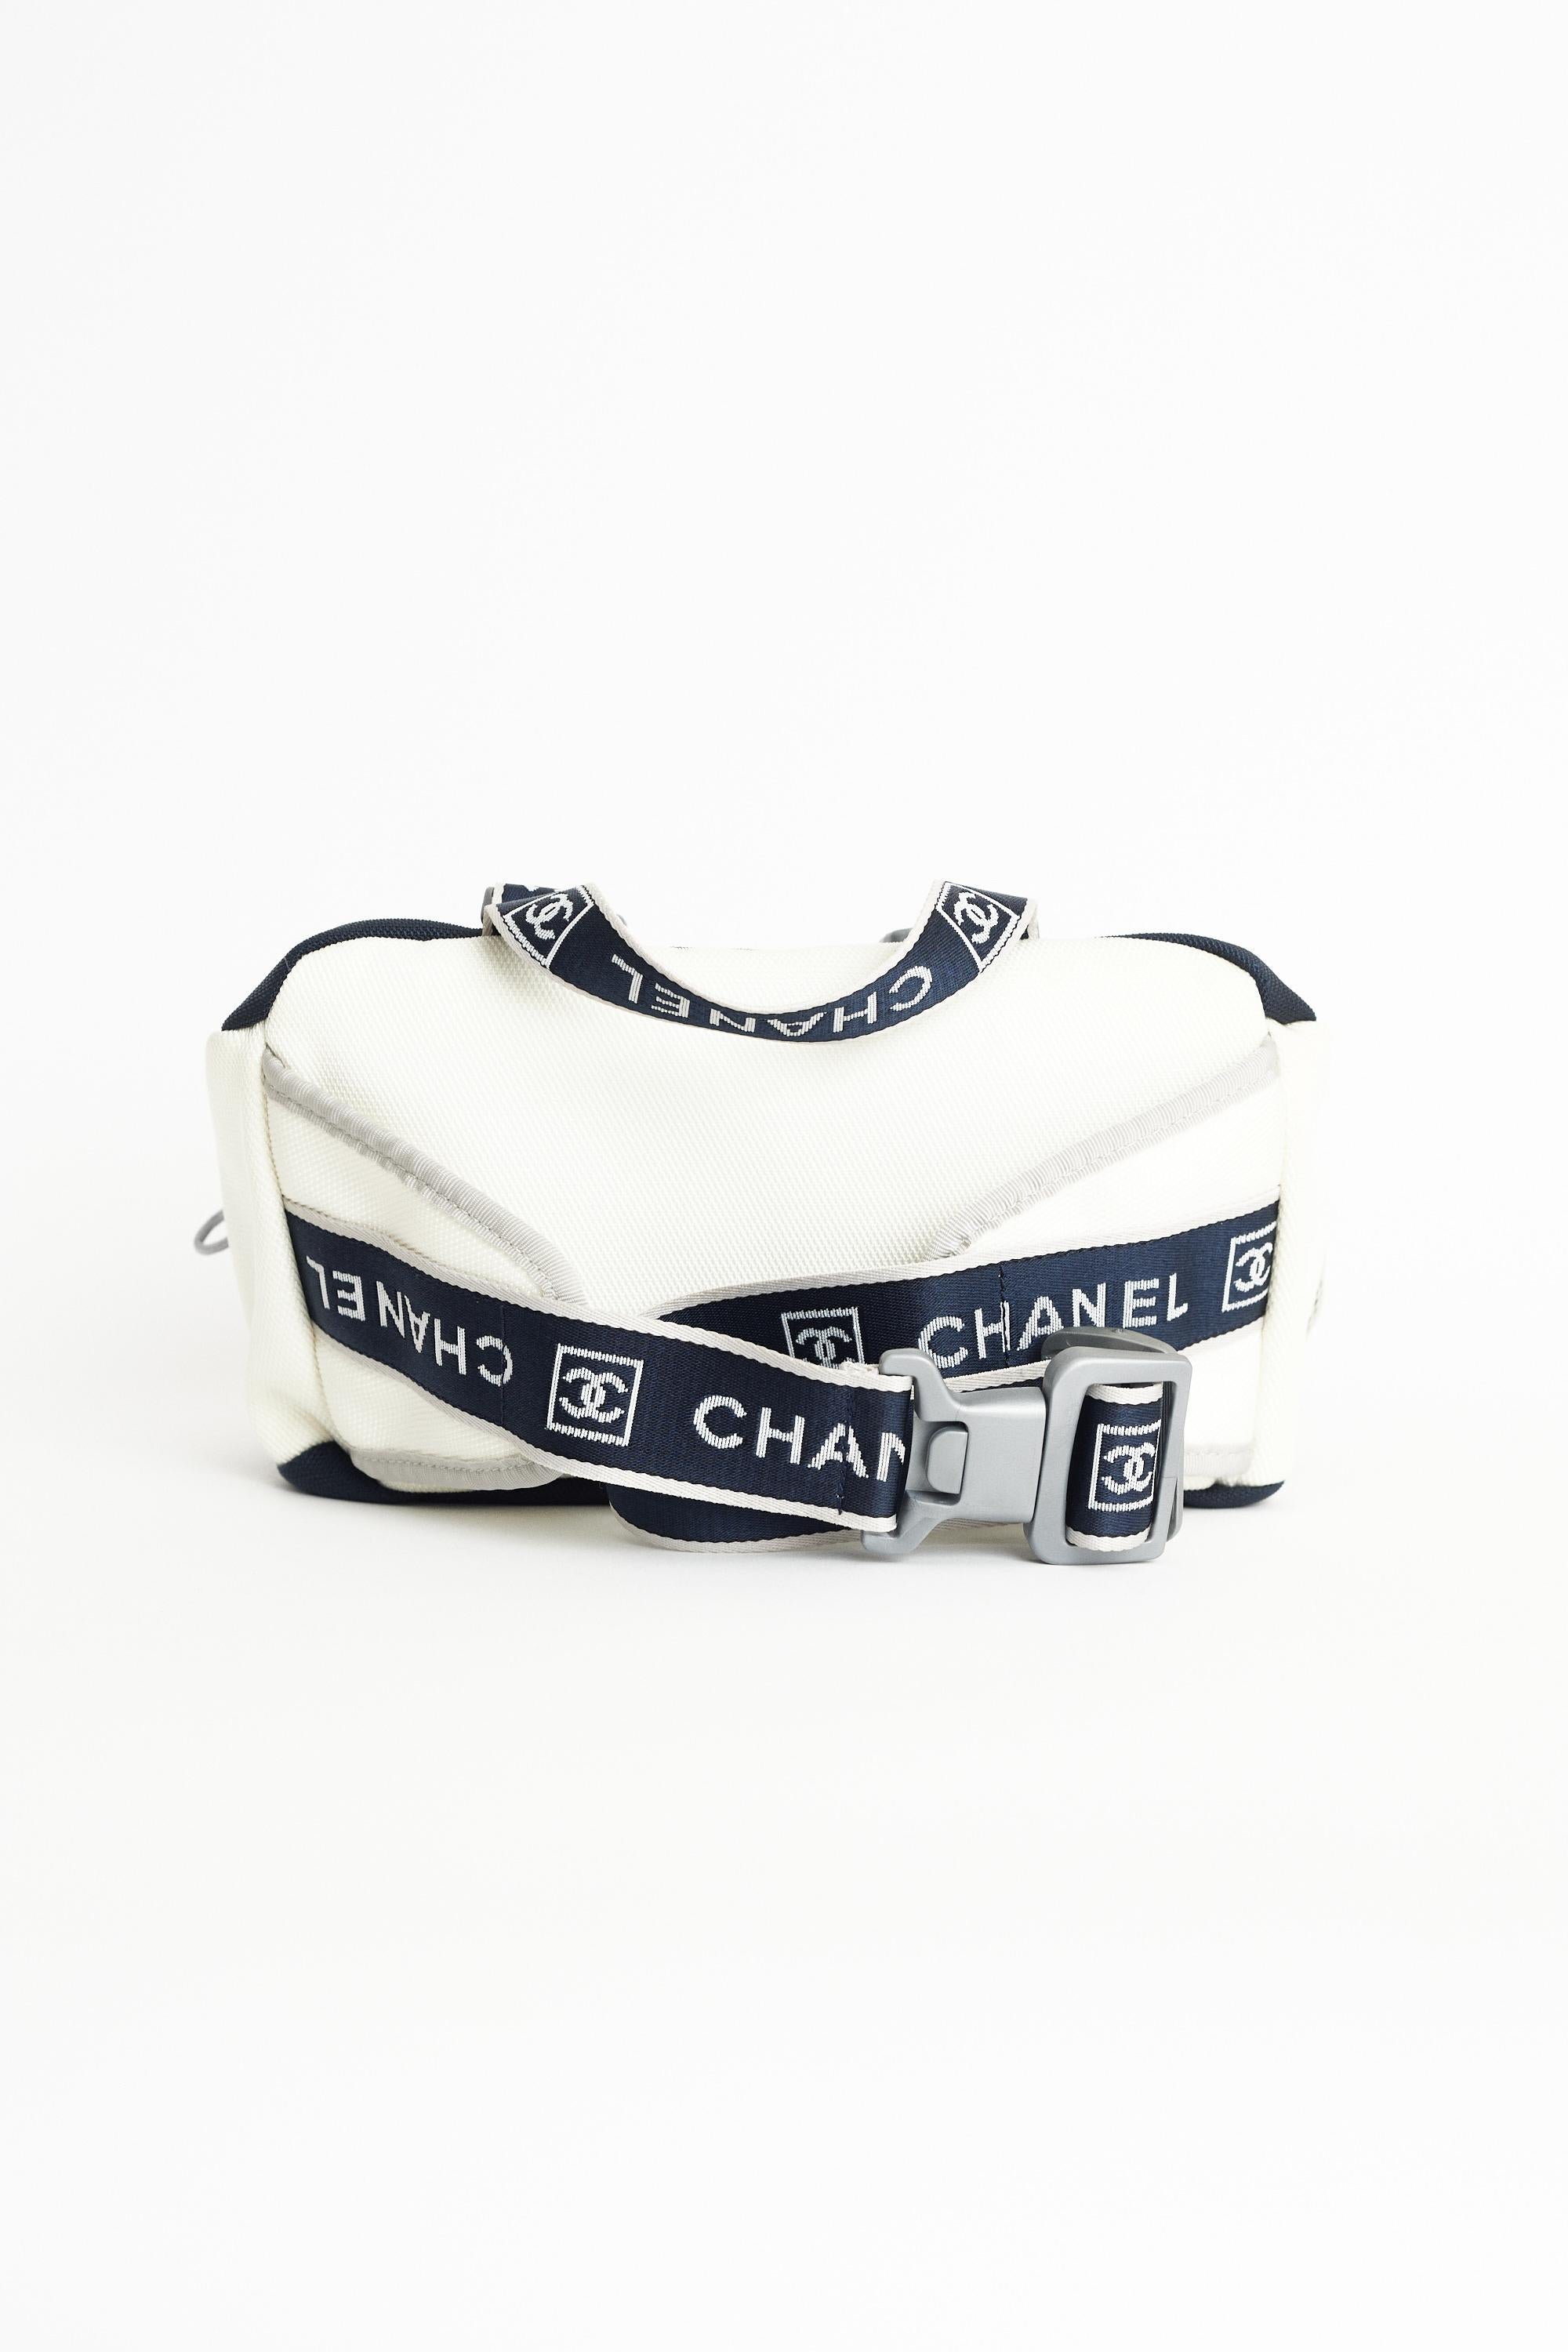 Chanel 2004/2005 Bum Bag In Excellent Condition In London, GB